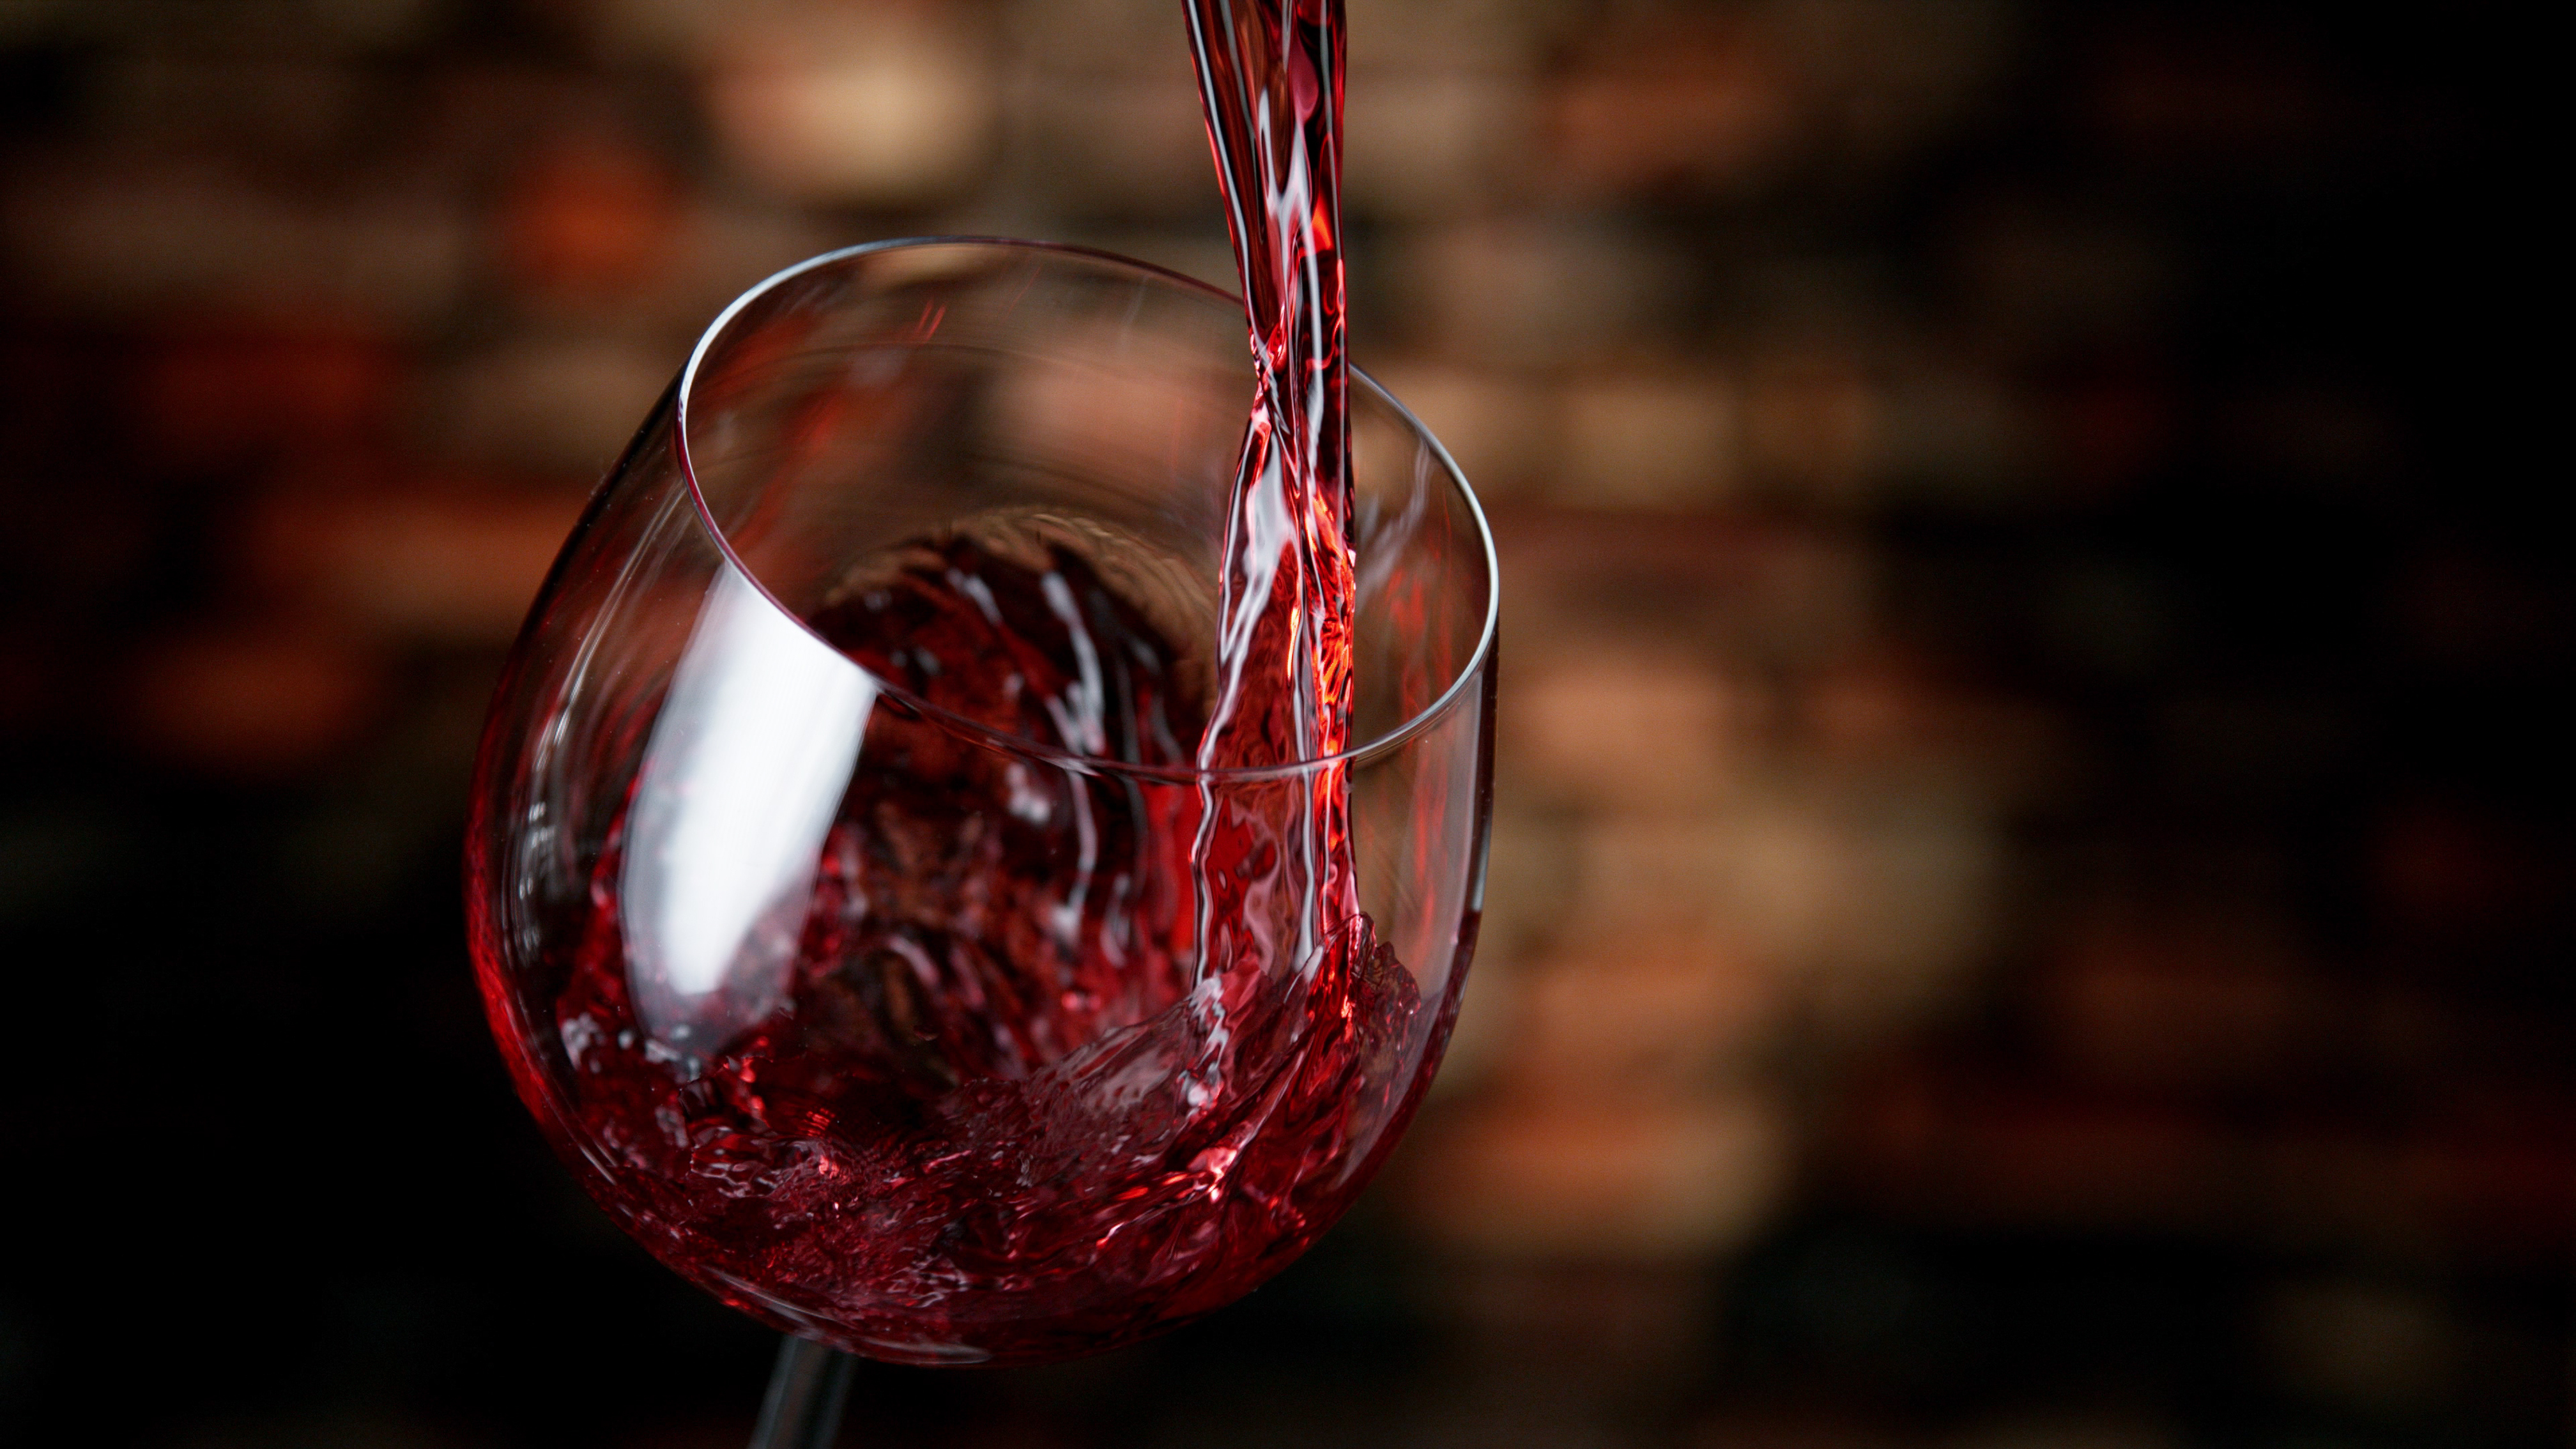 NEWSLINE: Does red wine really have health benefits?